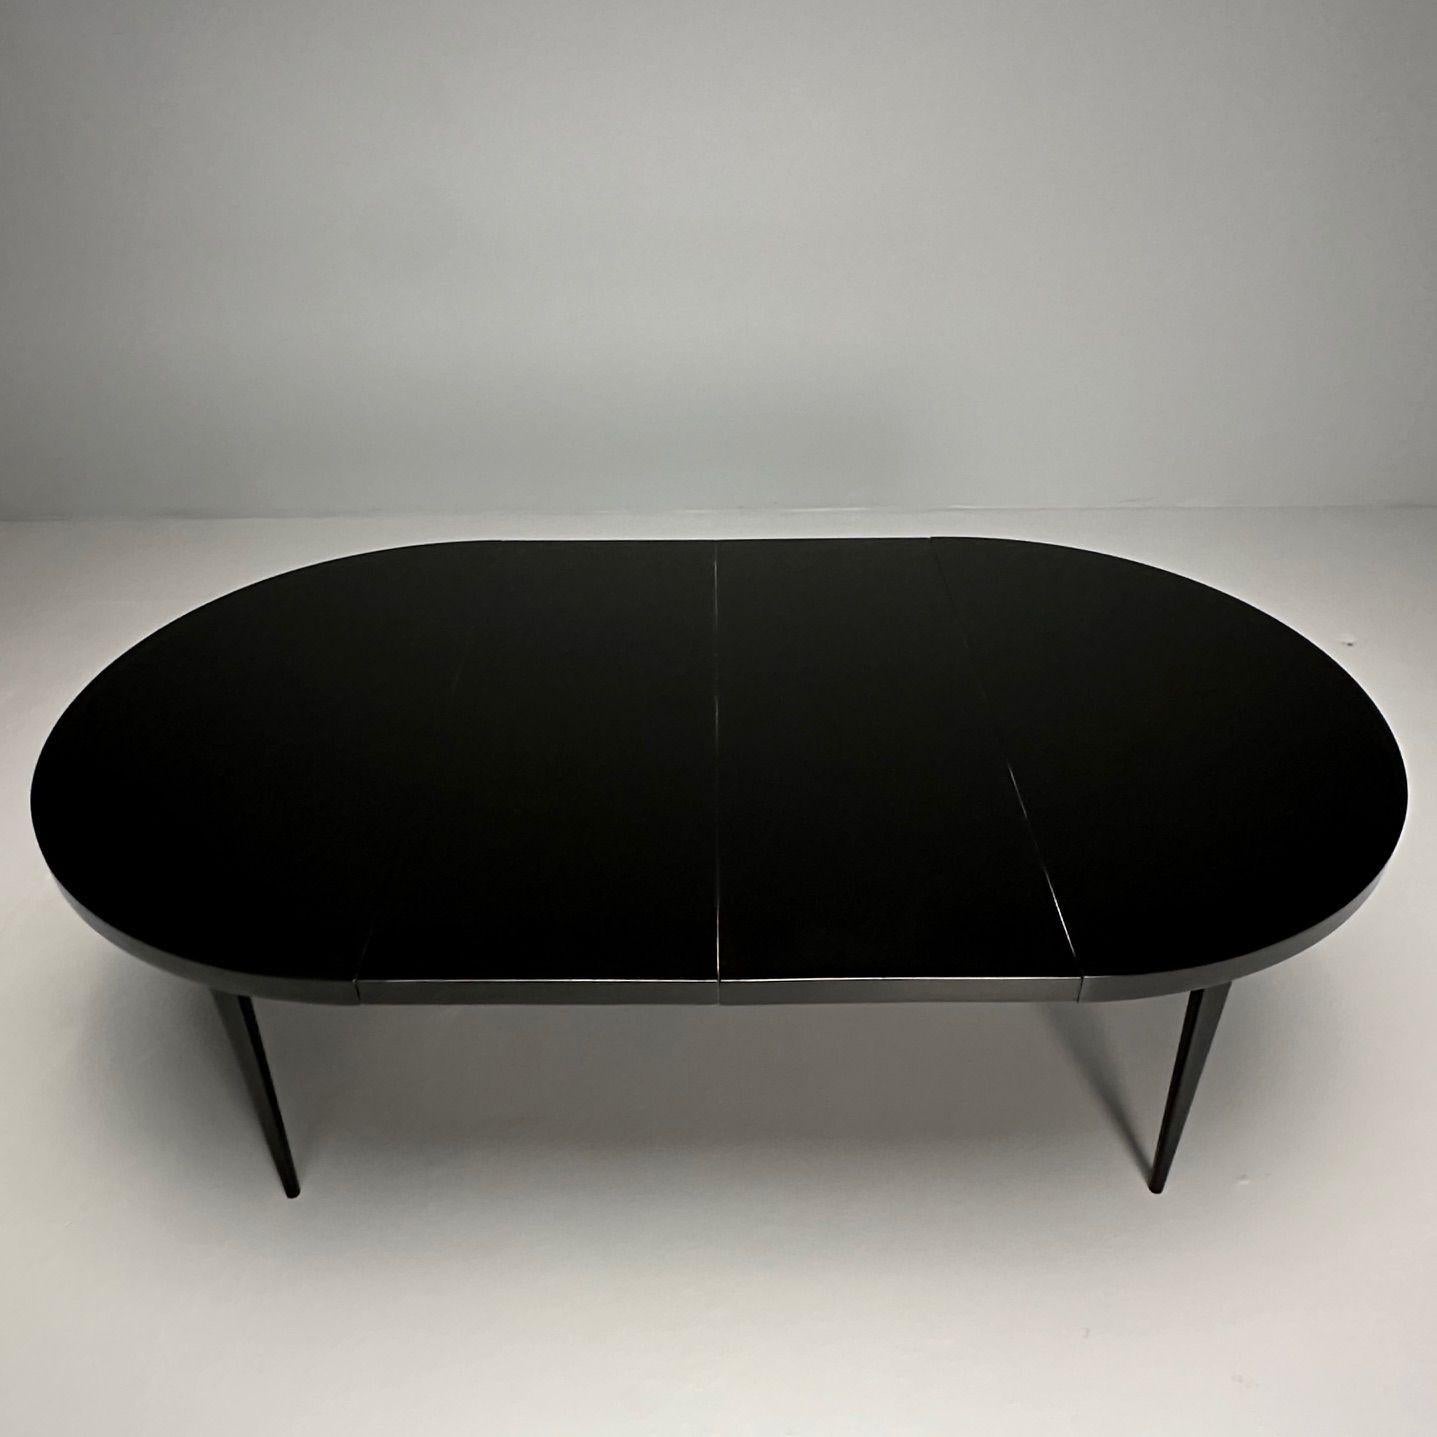 Paul McCobb, Mid-Century Modern Planner Group Dining Table, Black Lacquer, 1950s For Sale 2